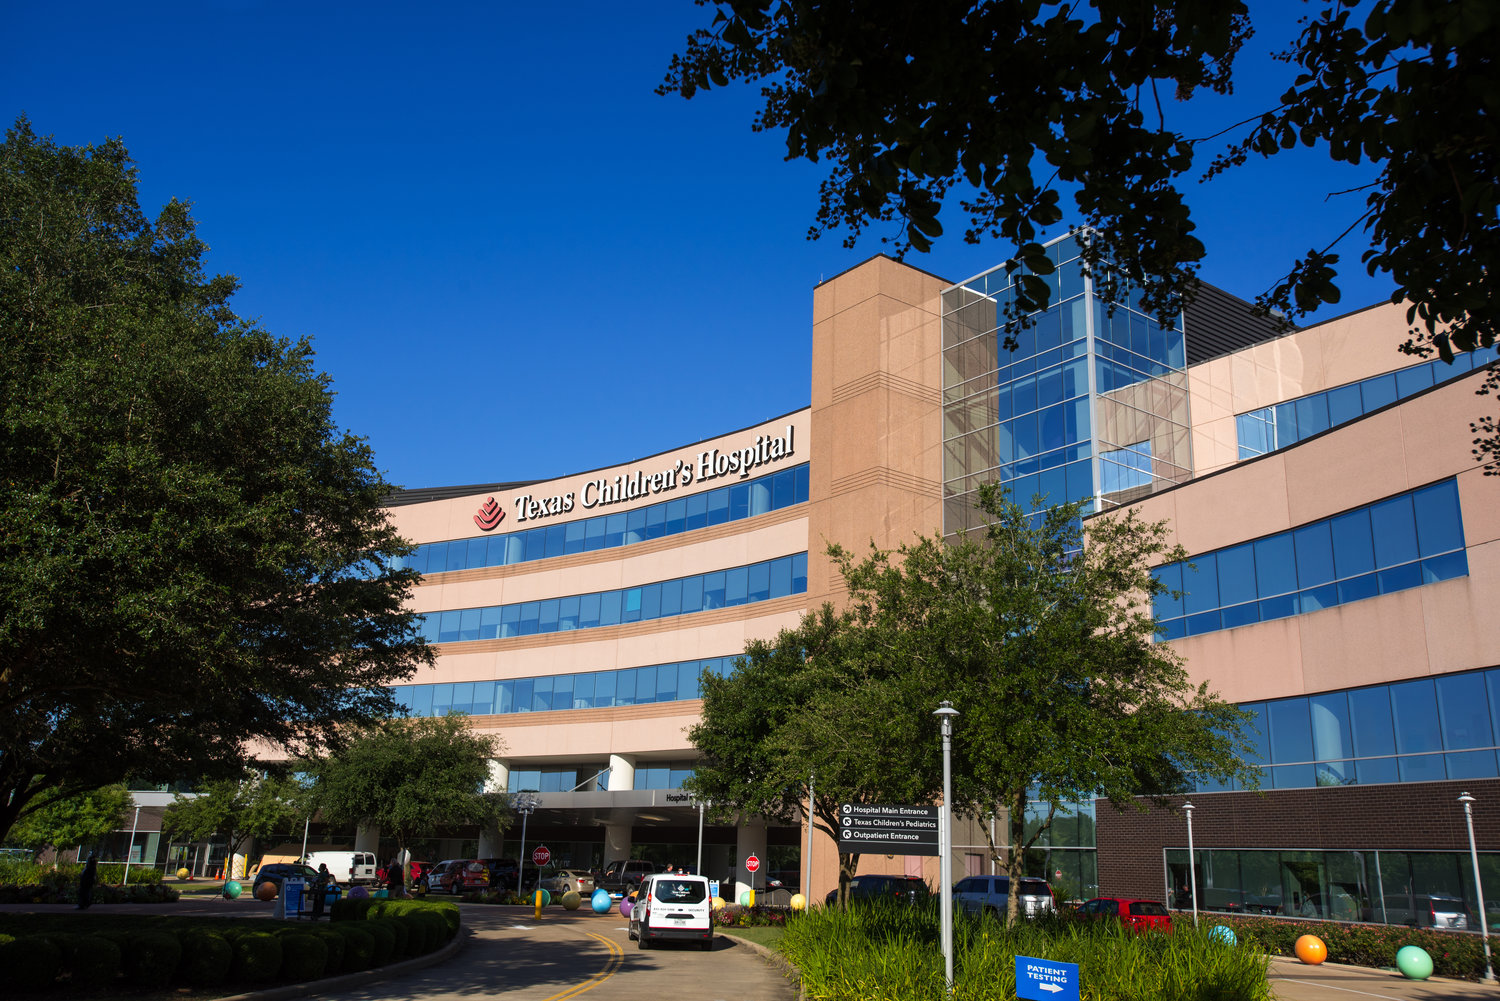 The Texas Children’s Hospital works to create a safe environment for patients and gives out masks to all patients and visitors.